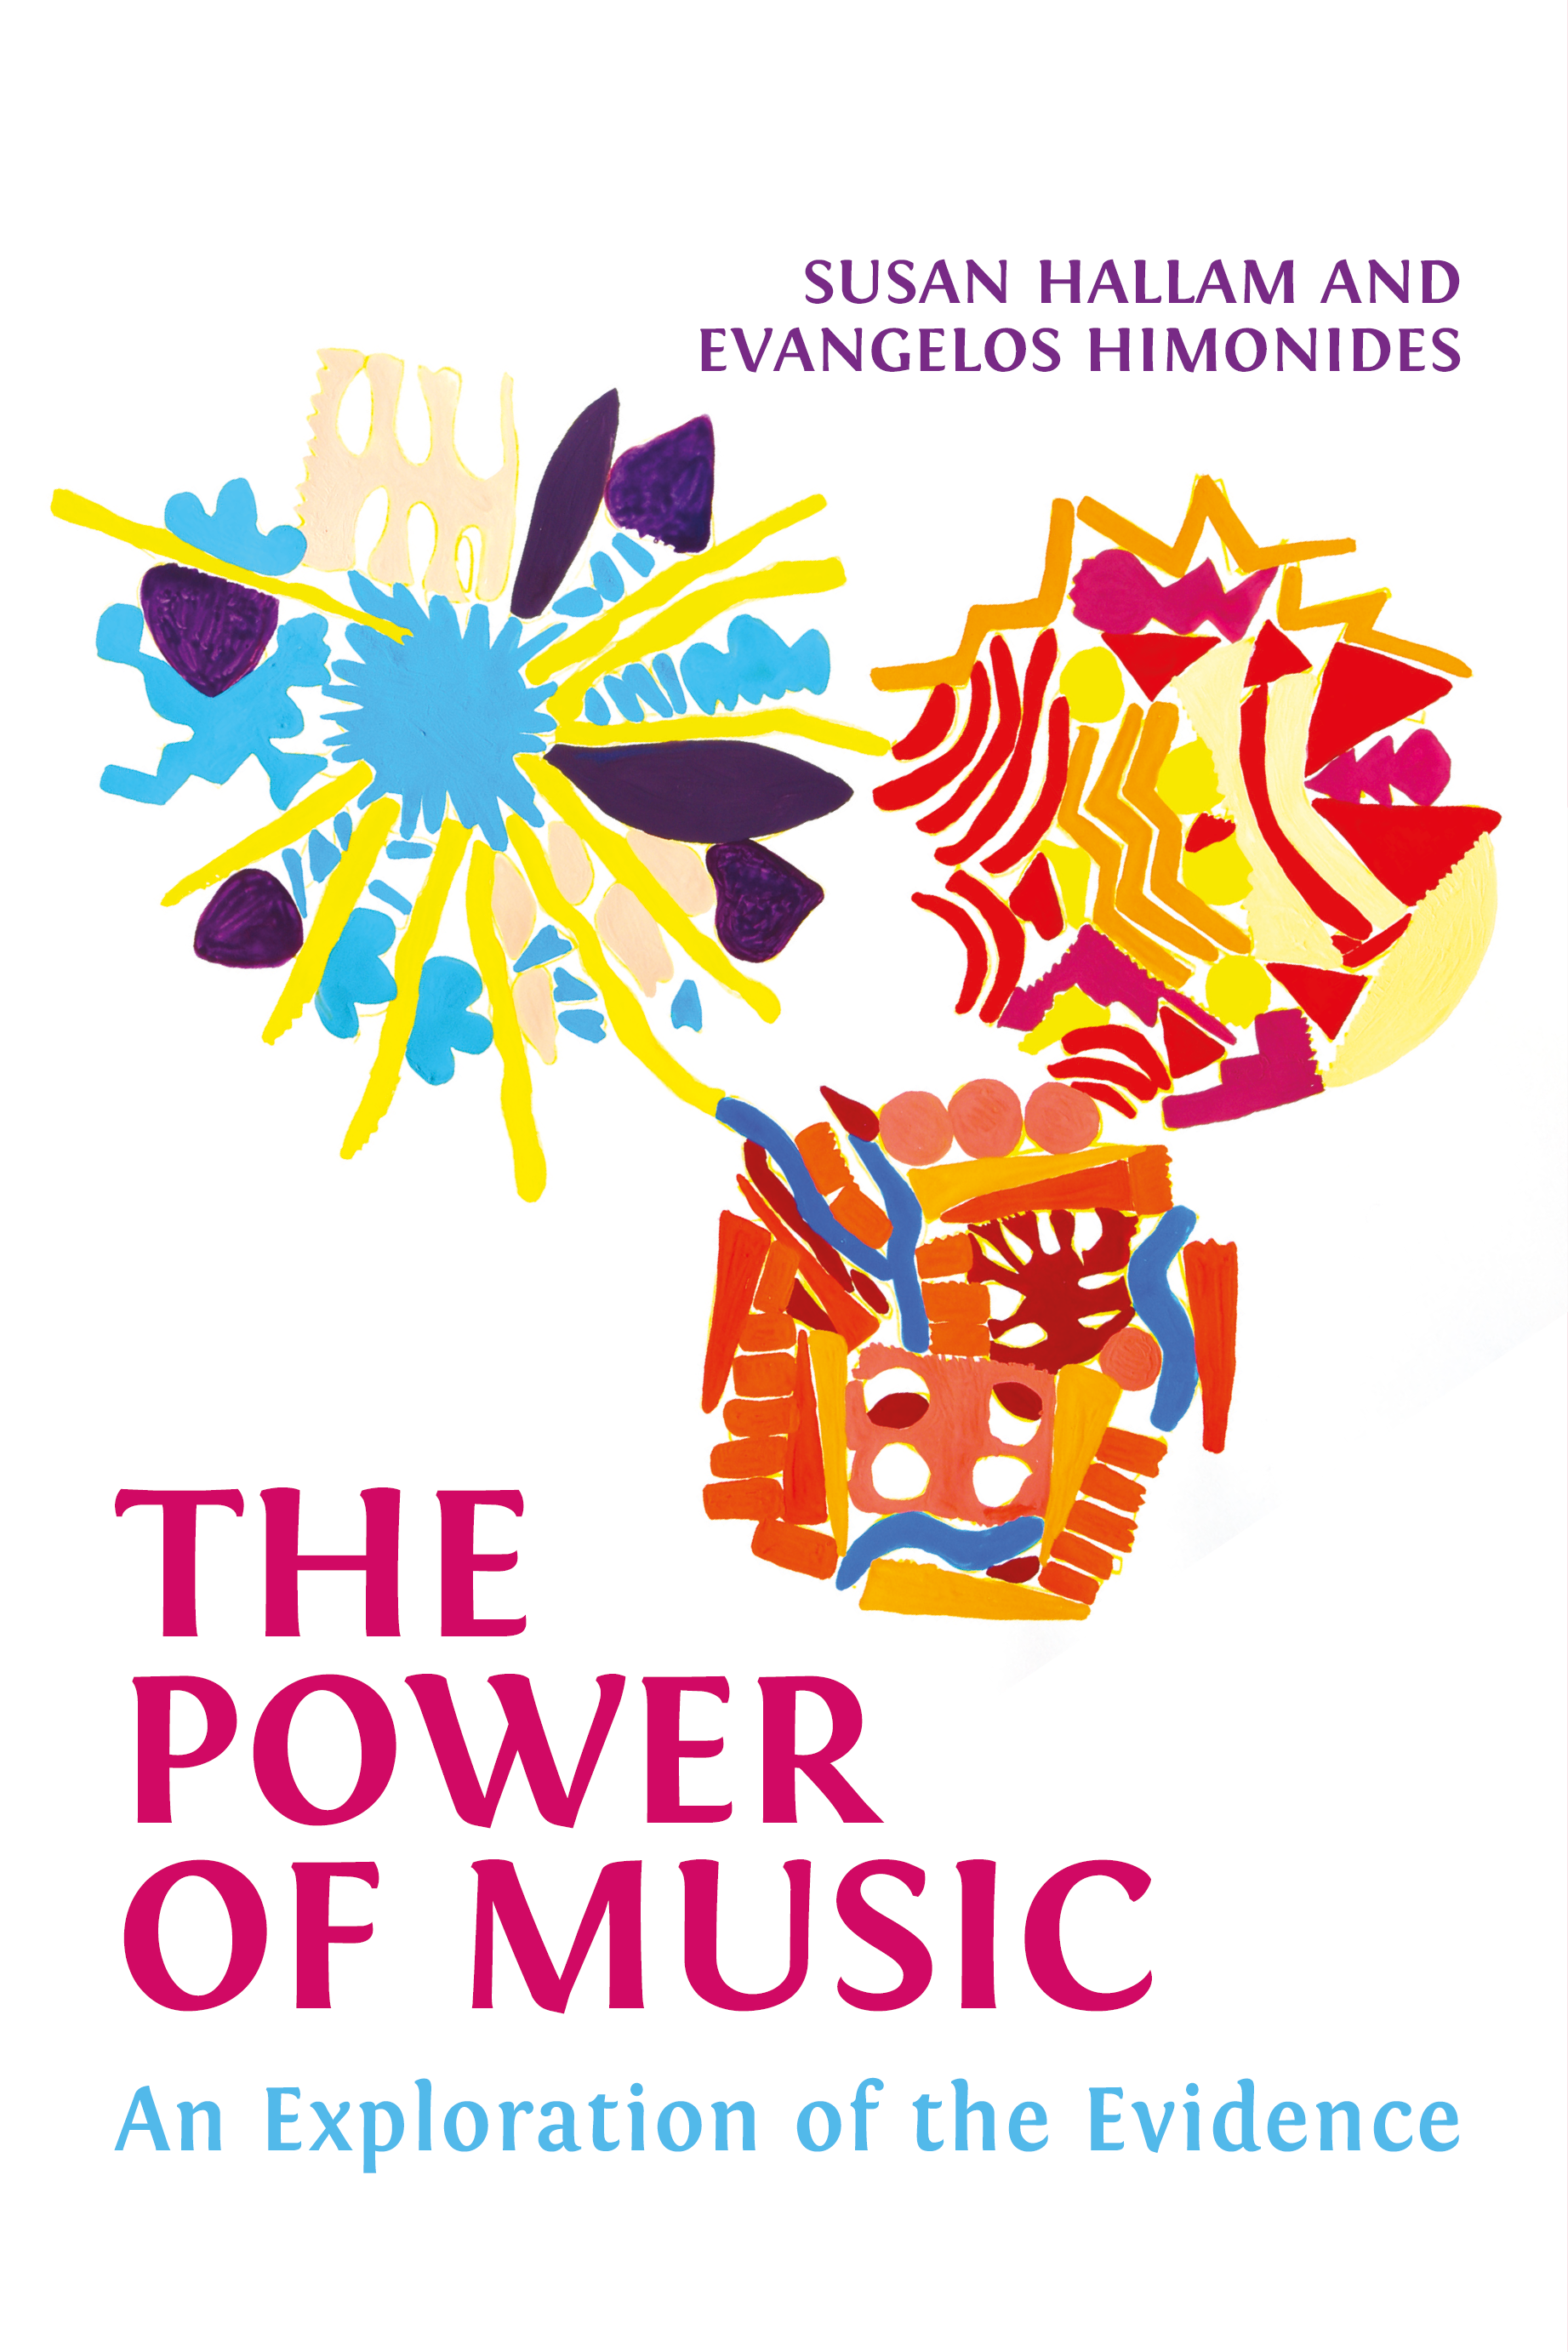 The Power of Music book cover image